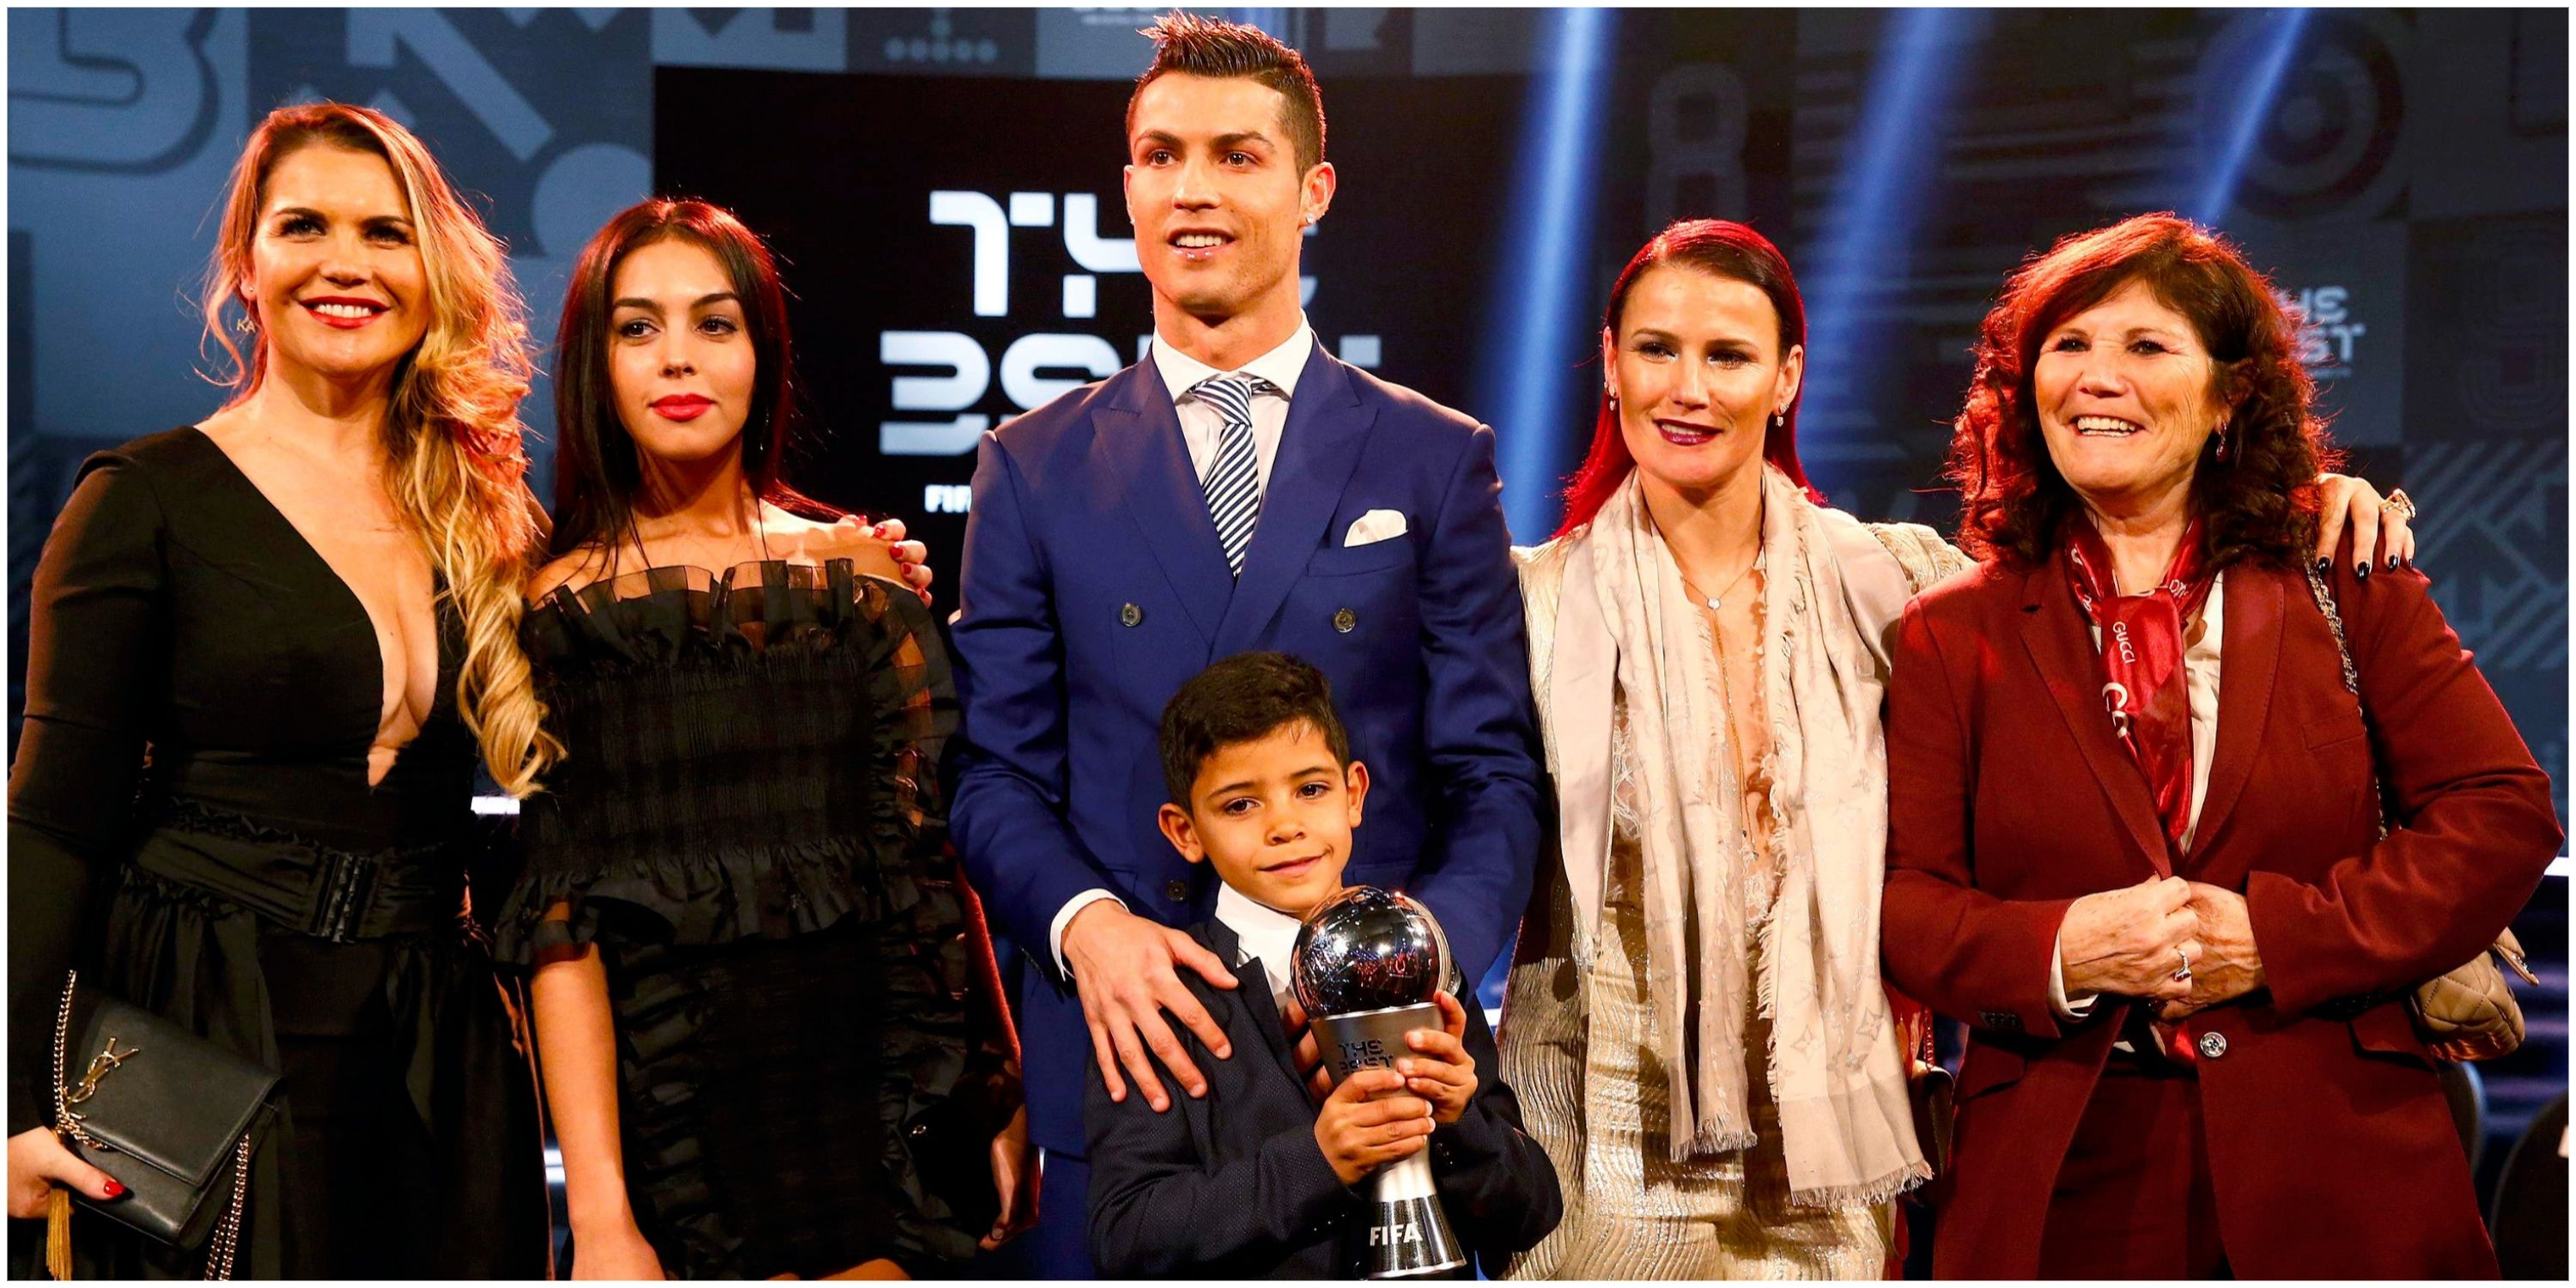 Cristiano Ronaldo’s sister makes her feelings clear after Lionel Messi’s eighth Ballon d’Or win